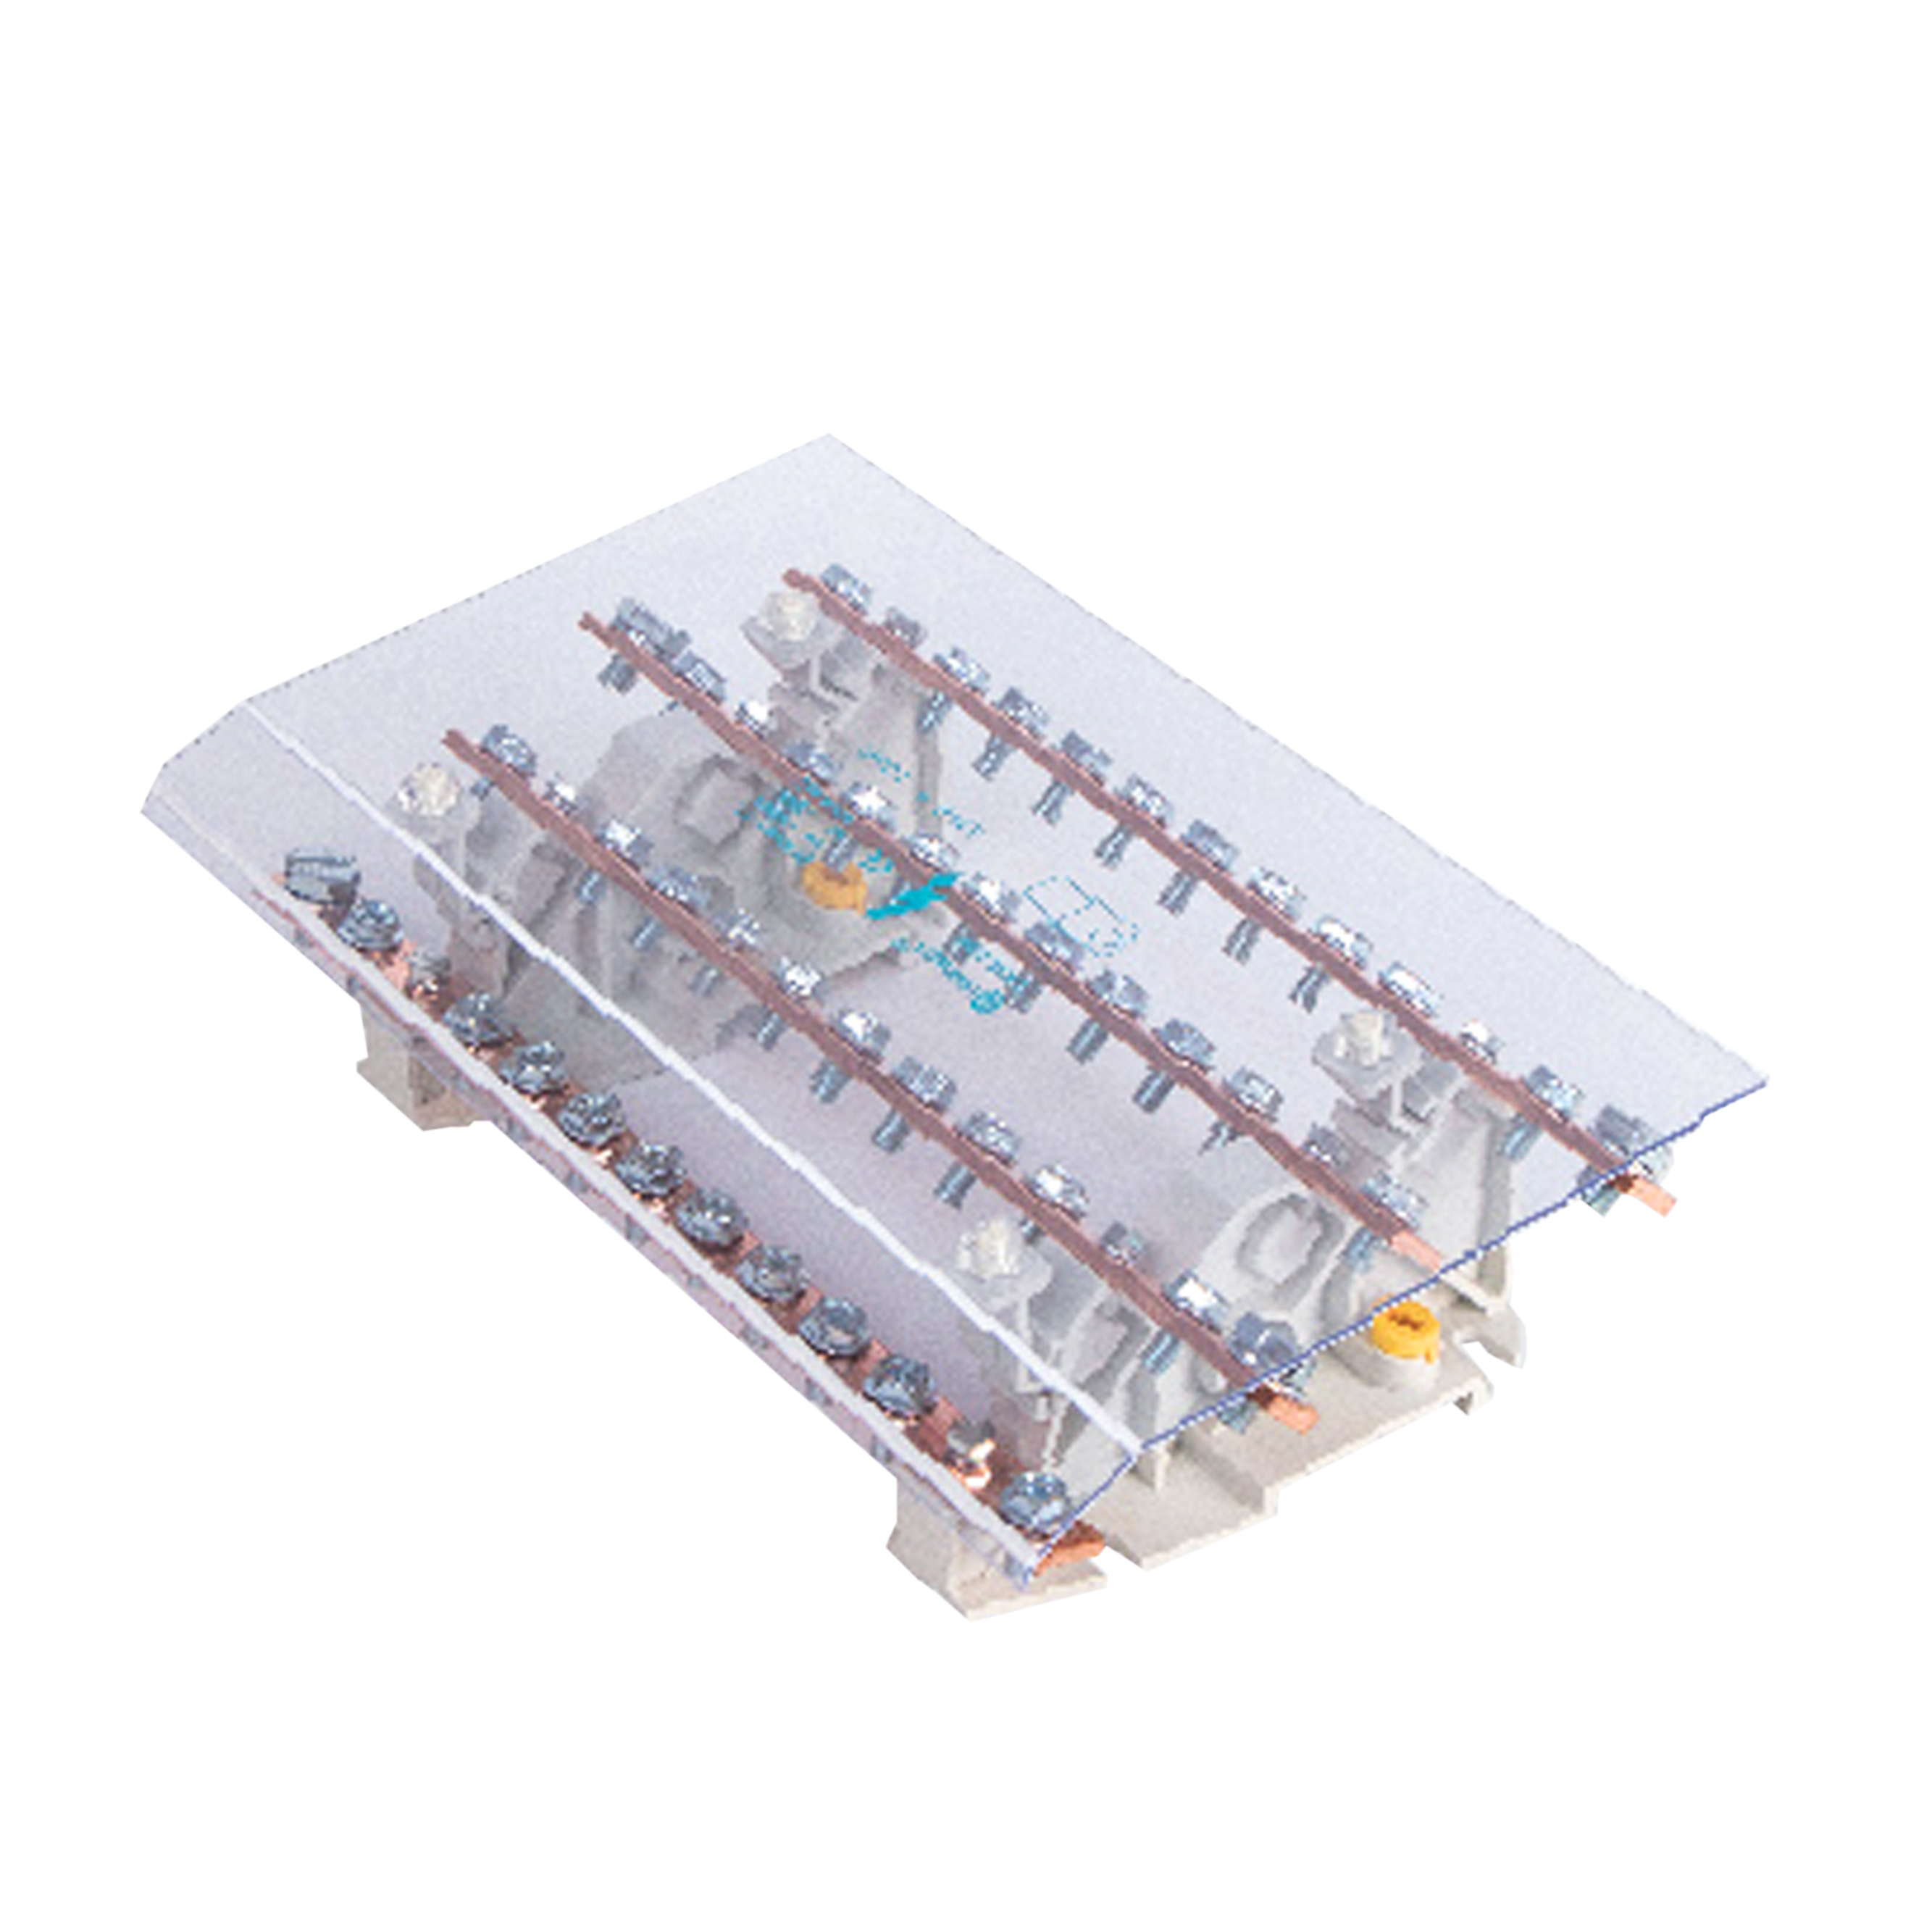 4-pole junction box for power distribution cabinet